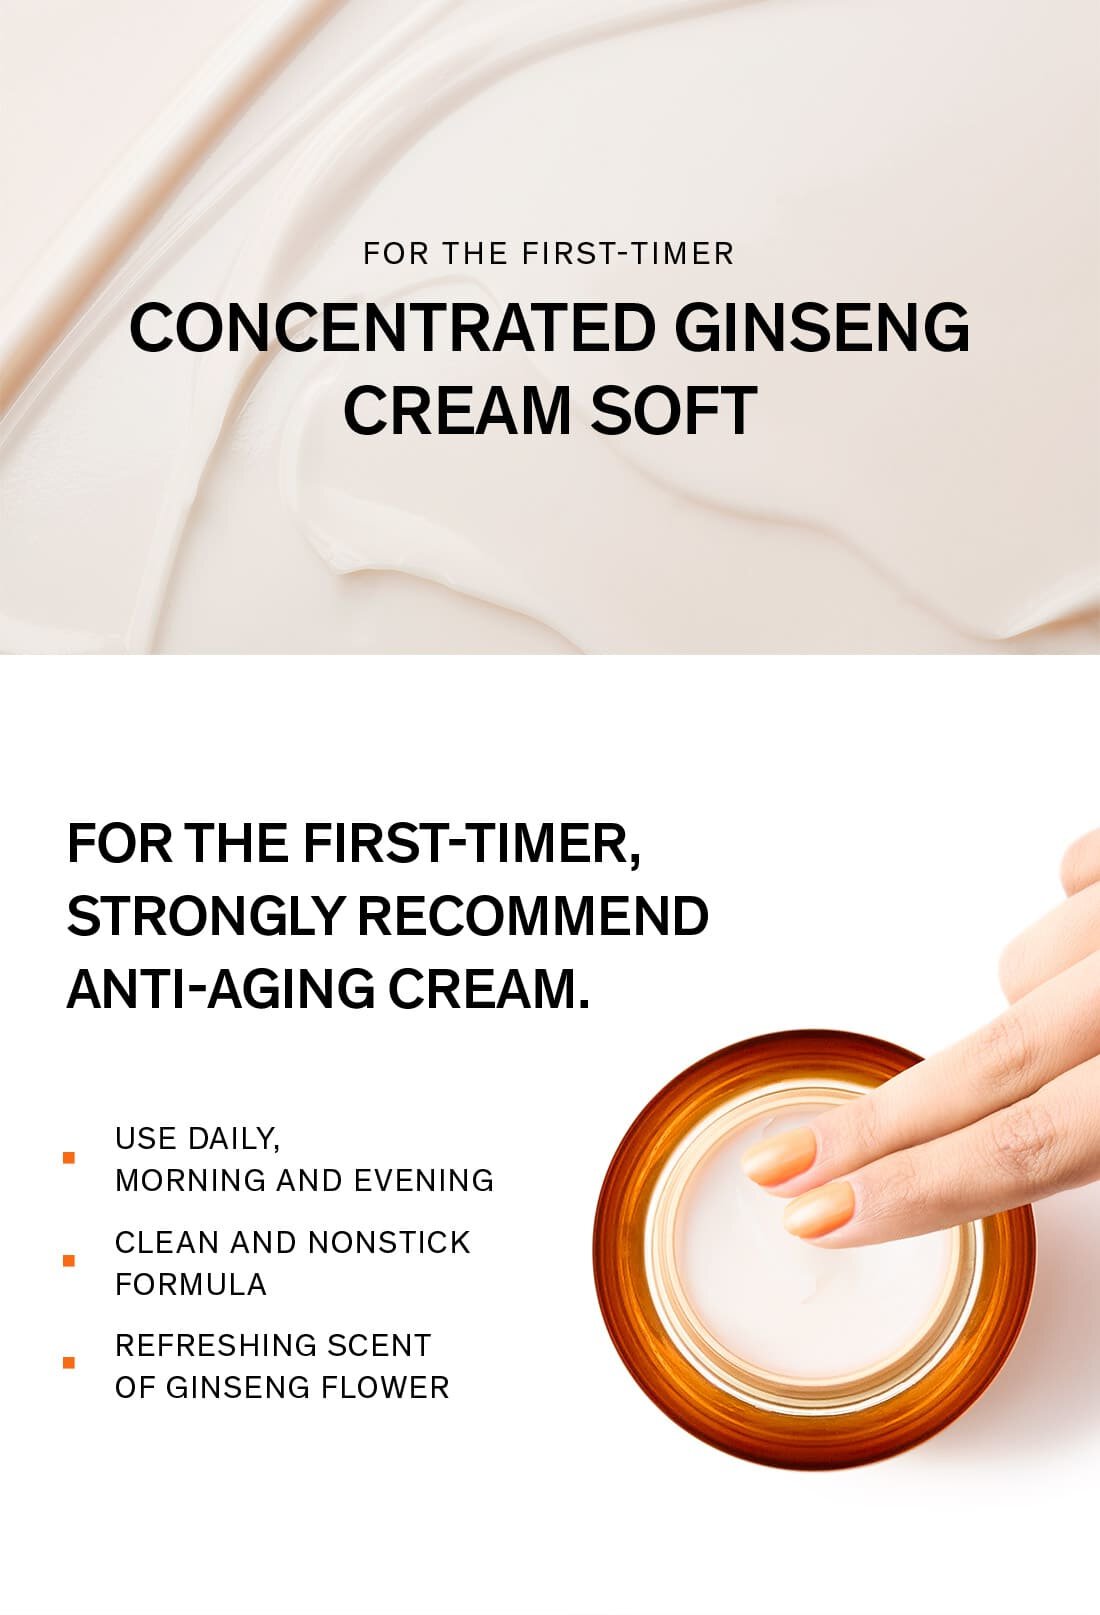 For the first-timer CONCENTRATED GINSENG CREAM SOFT FOR THE FIRST-TIMER, STRONGLY RECOMMEND ANTI-AGING CREAM.USE DAILY, MORNING AND EVENING CLEAN AND NONSTICK FORMULA REFRESHING SCENT OF GINSENG FLOWER